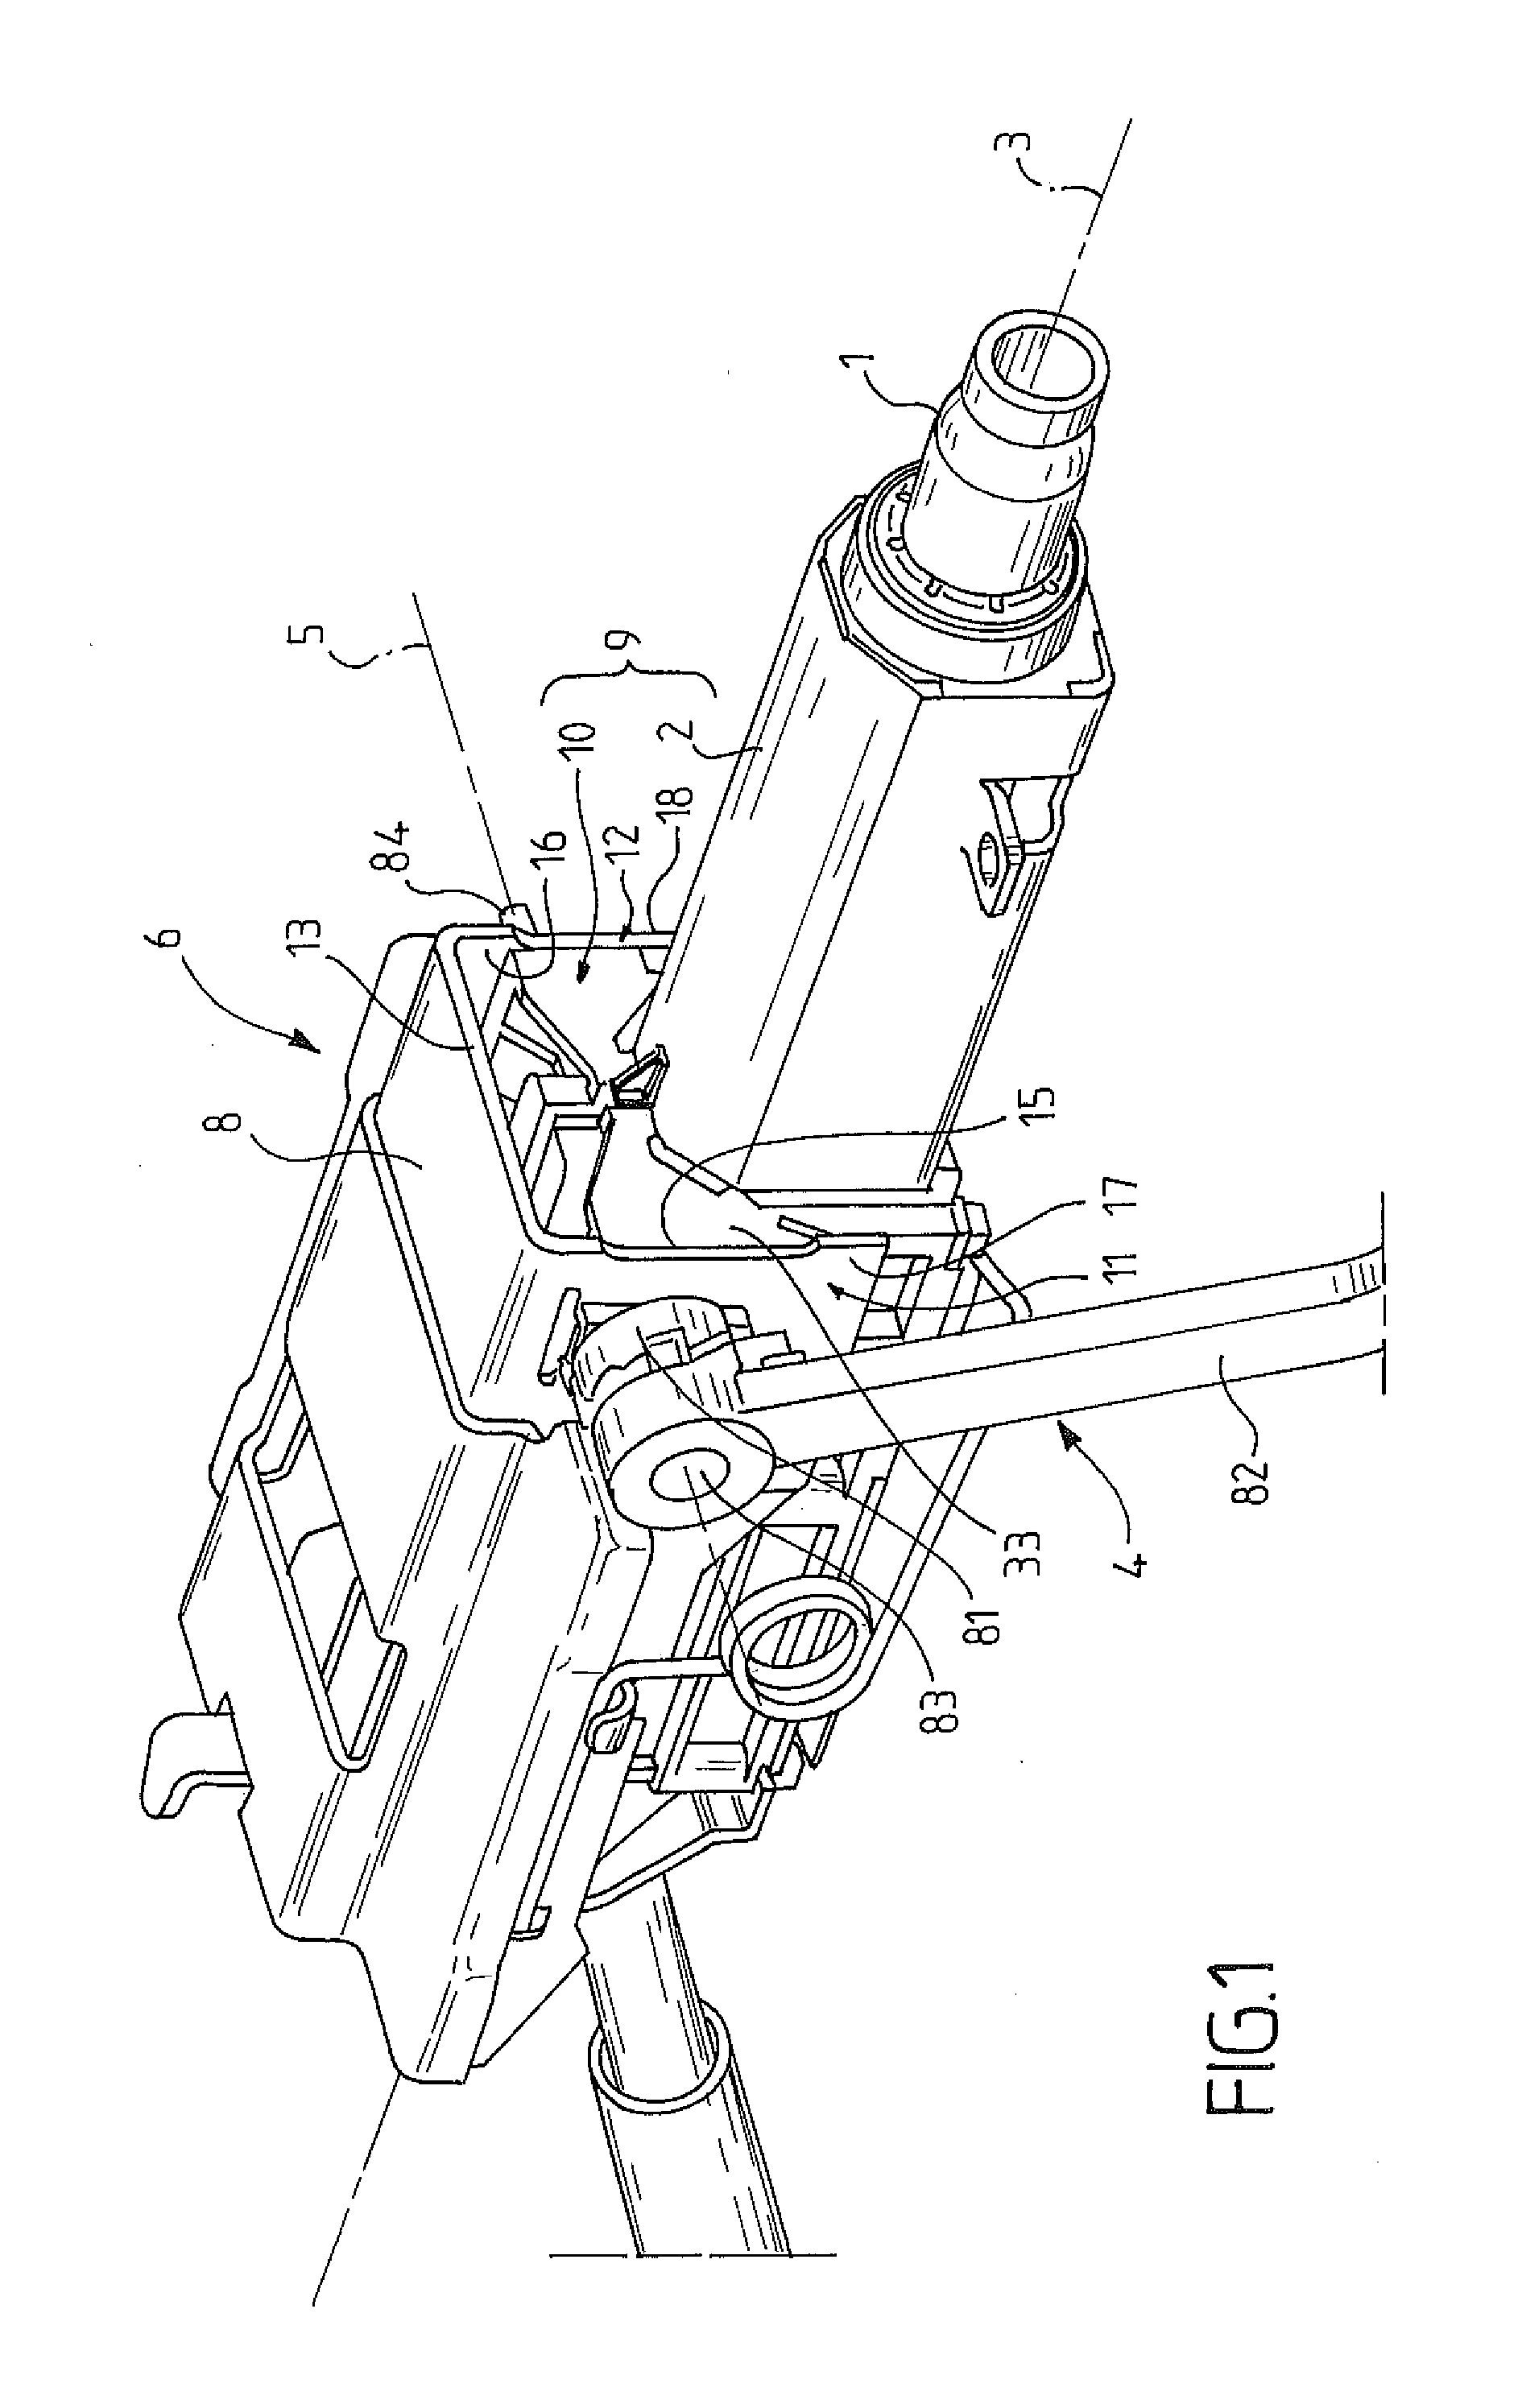 Energy absorption position-keeping device in an automotive vehicle steering column